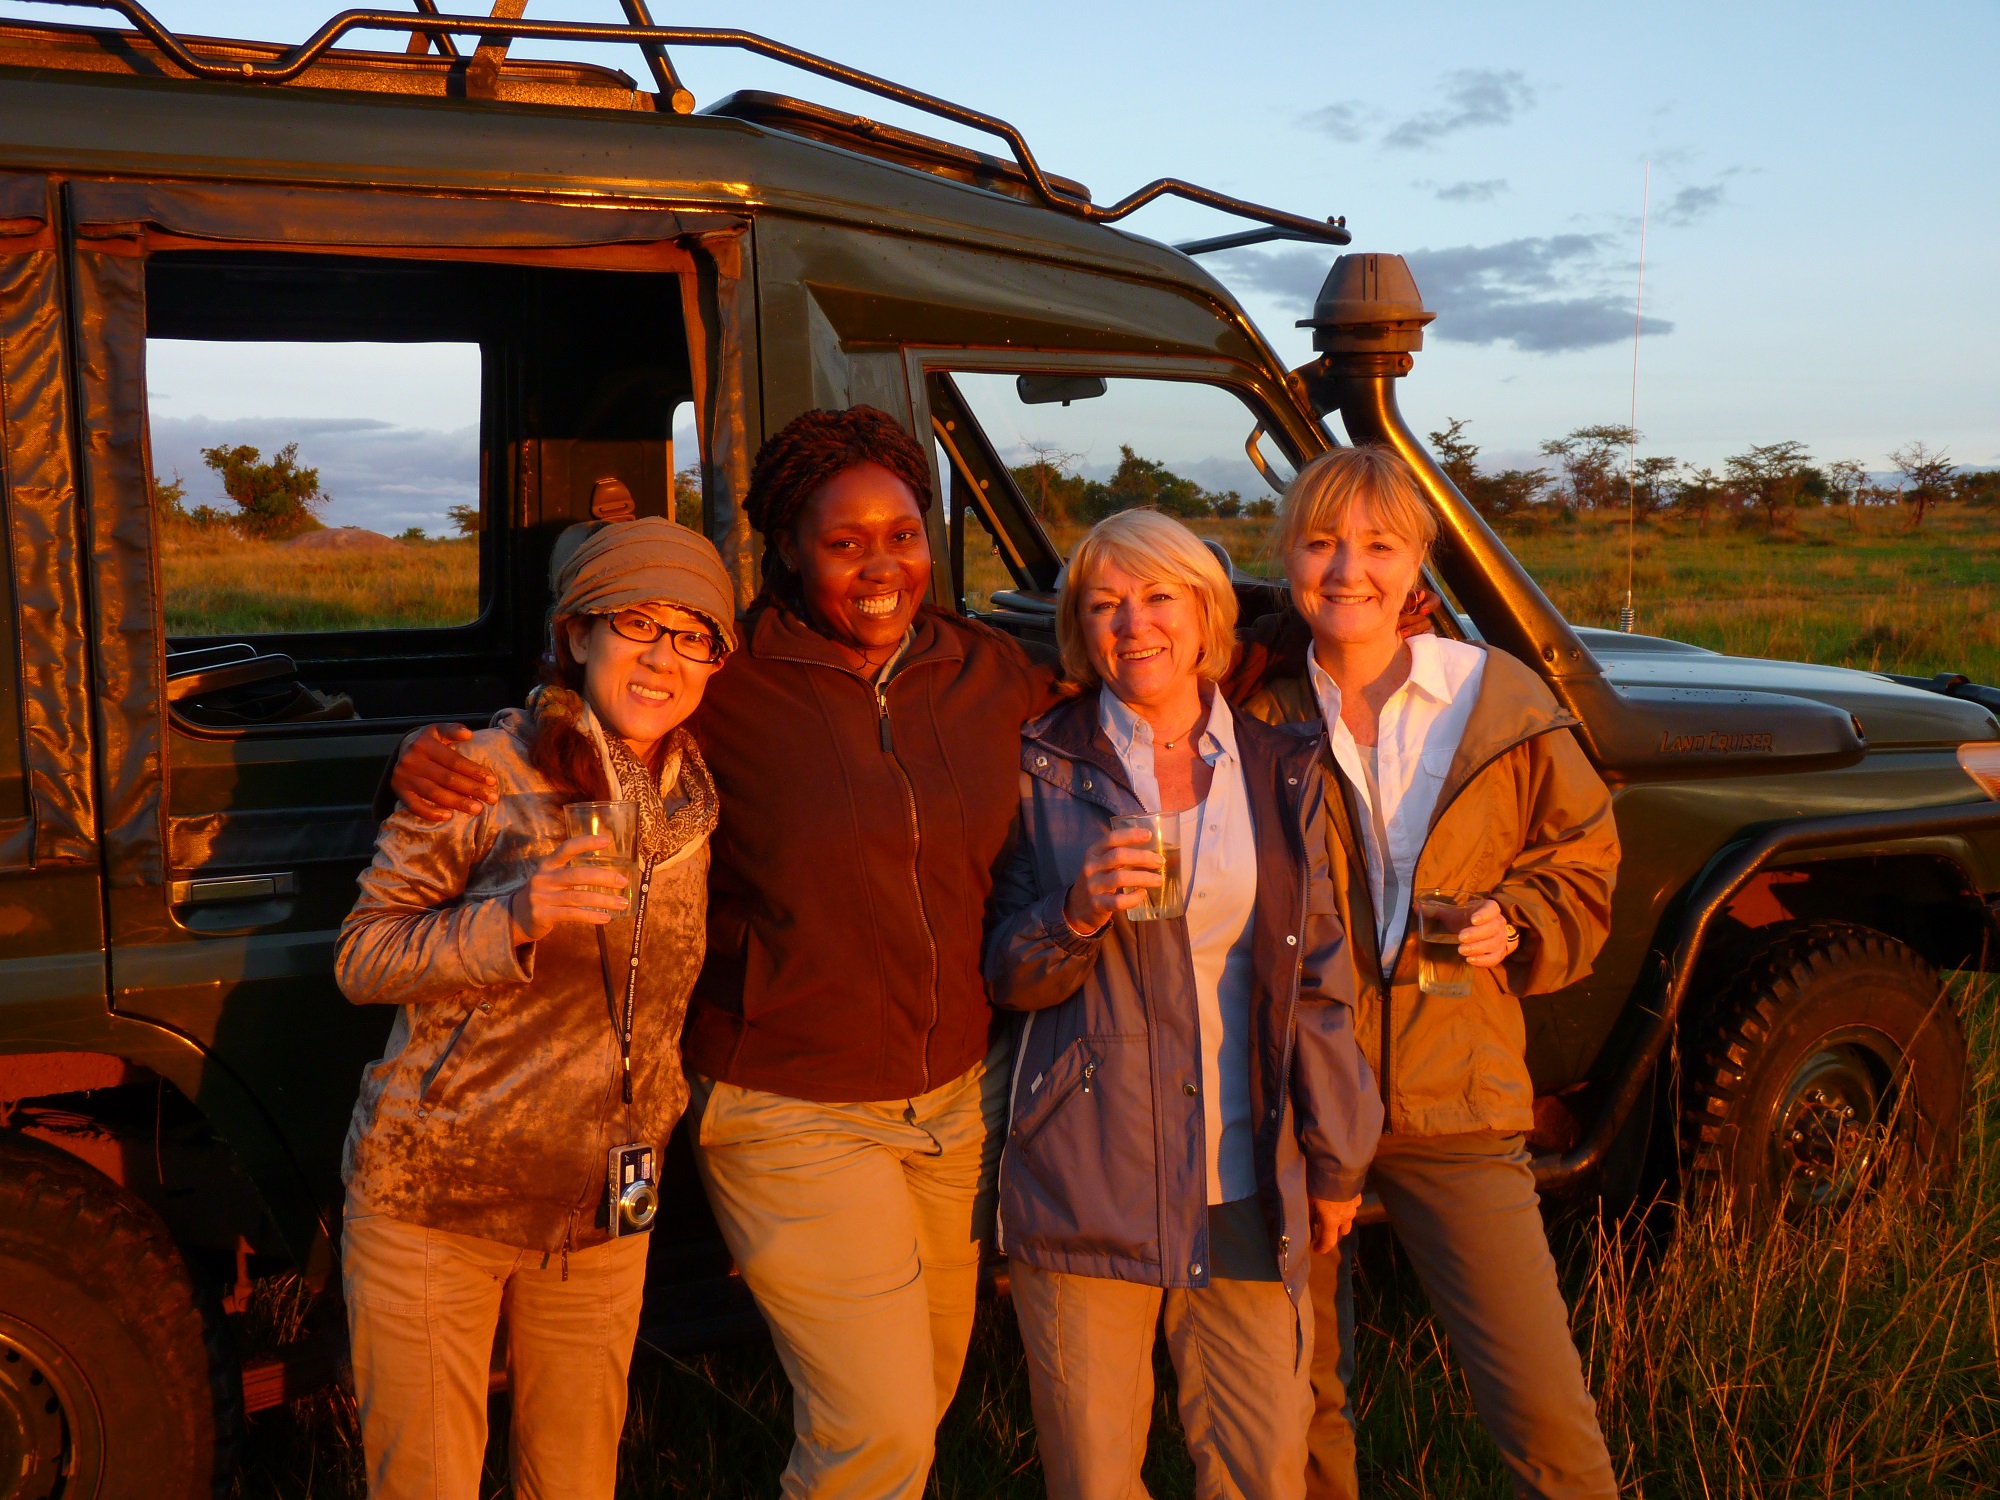 Visit Arusha’s tours let women taste, smell, hear, see and feel the real Africa.